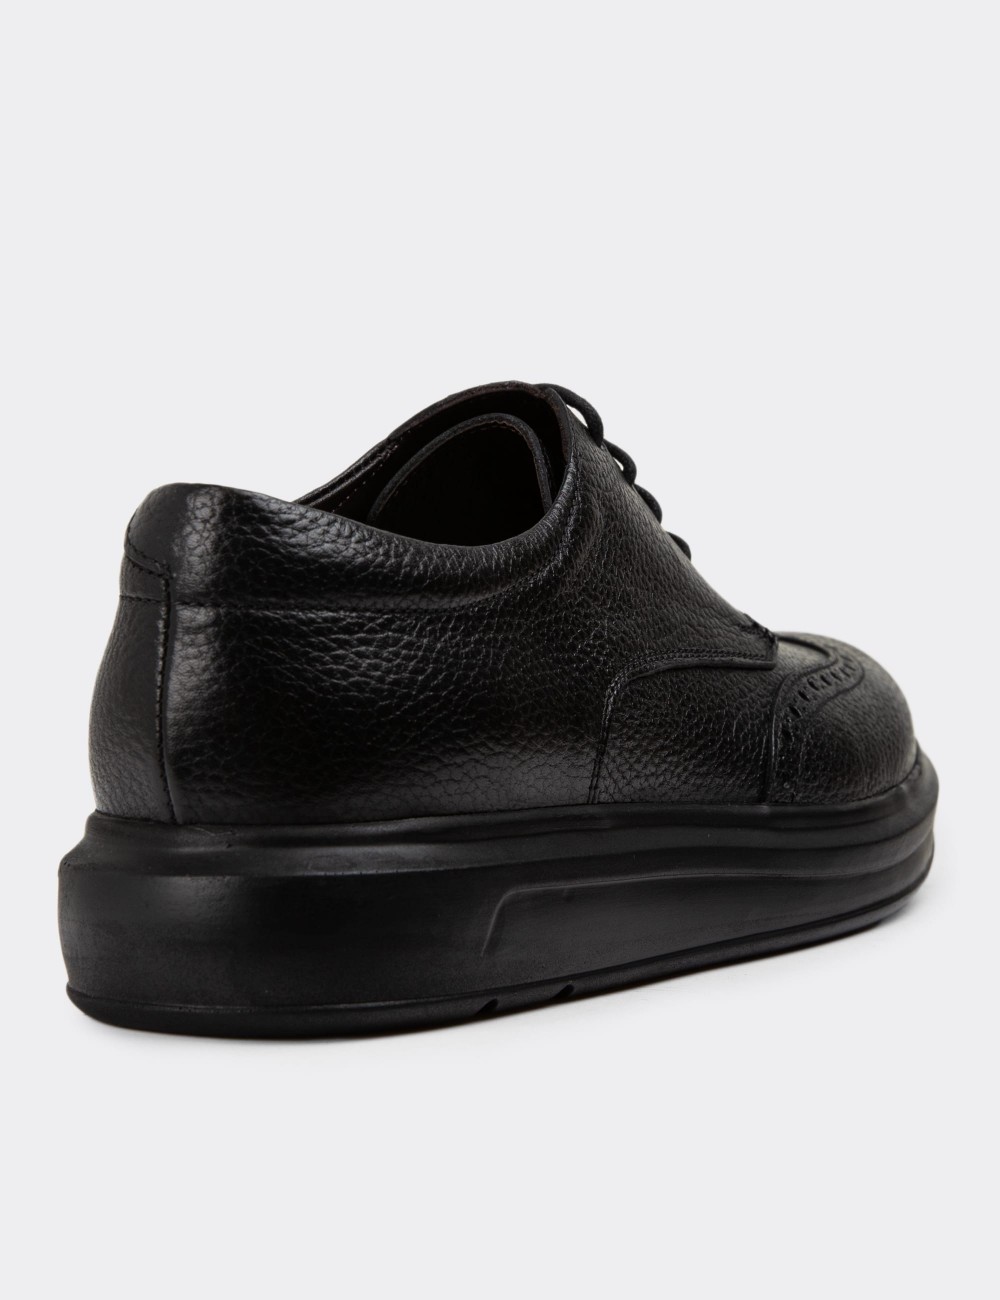 Black Leather Lace-up Shoes - 01942MSYHP01